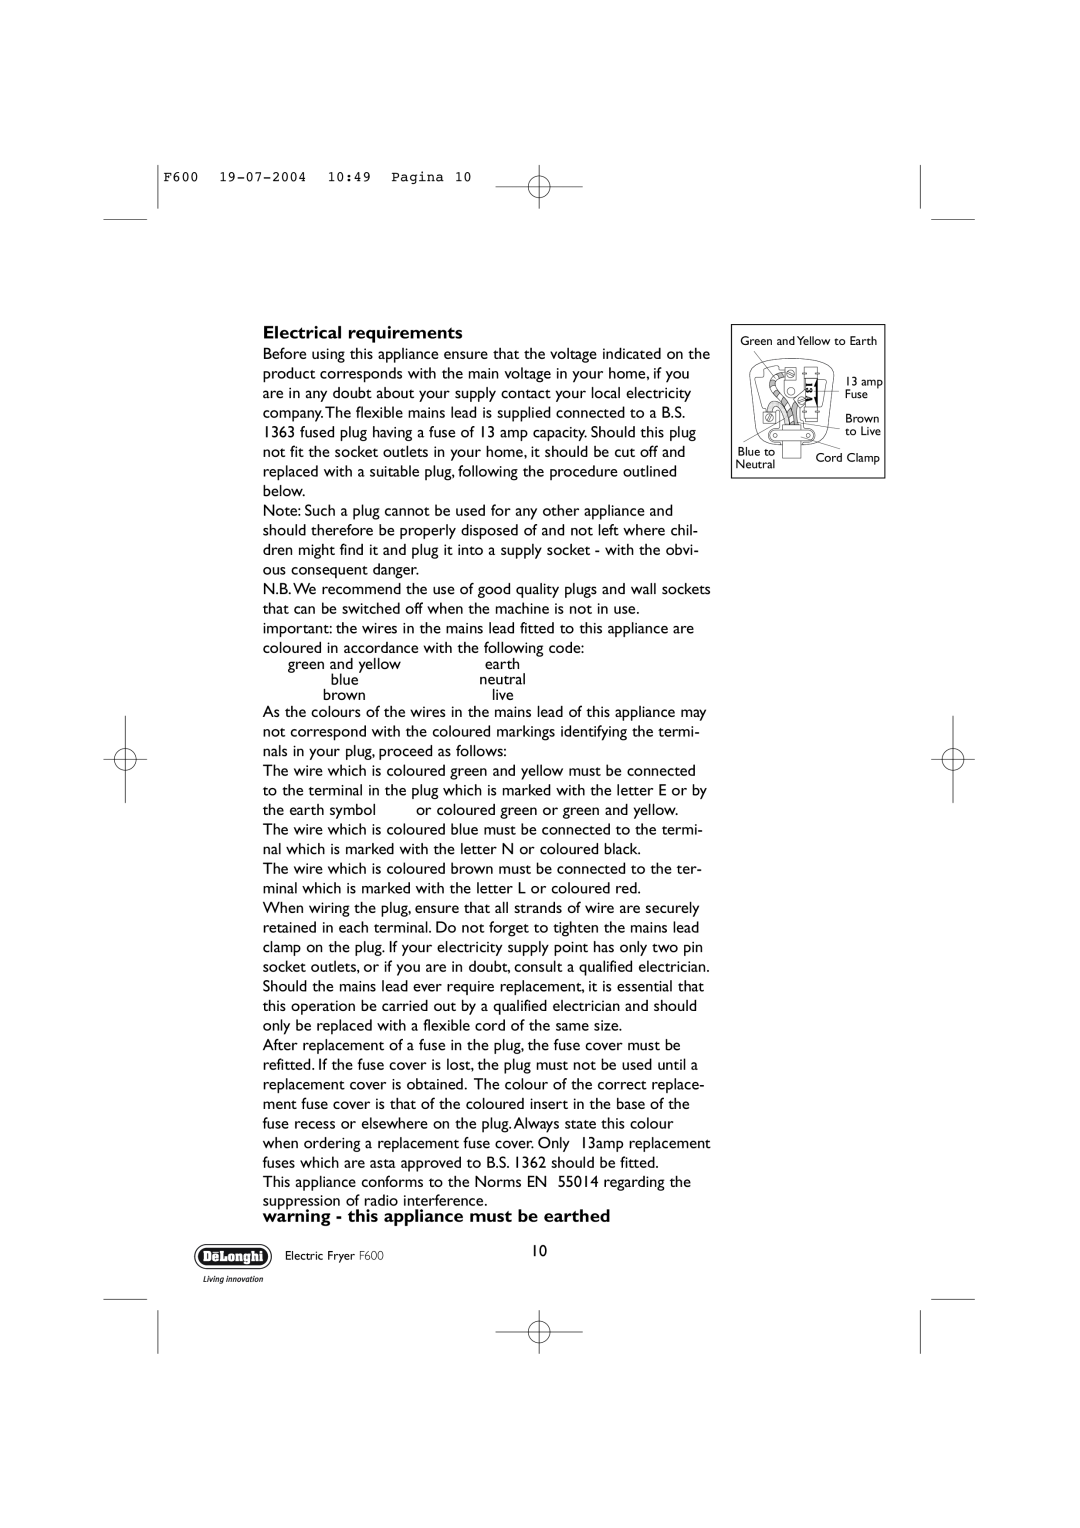 DeLonghi F600 manual Electrical requirements, warning - this appliance must be earthed 